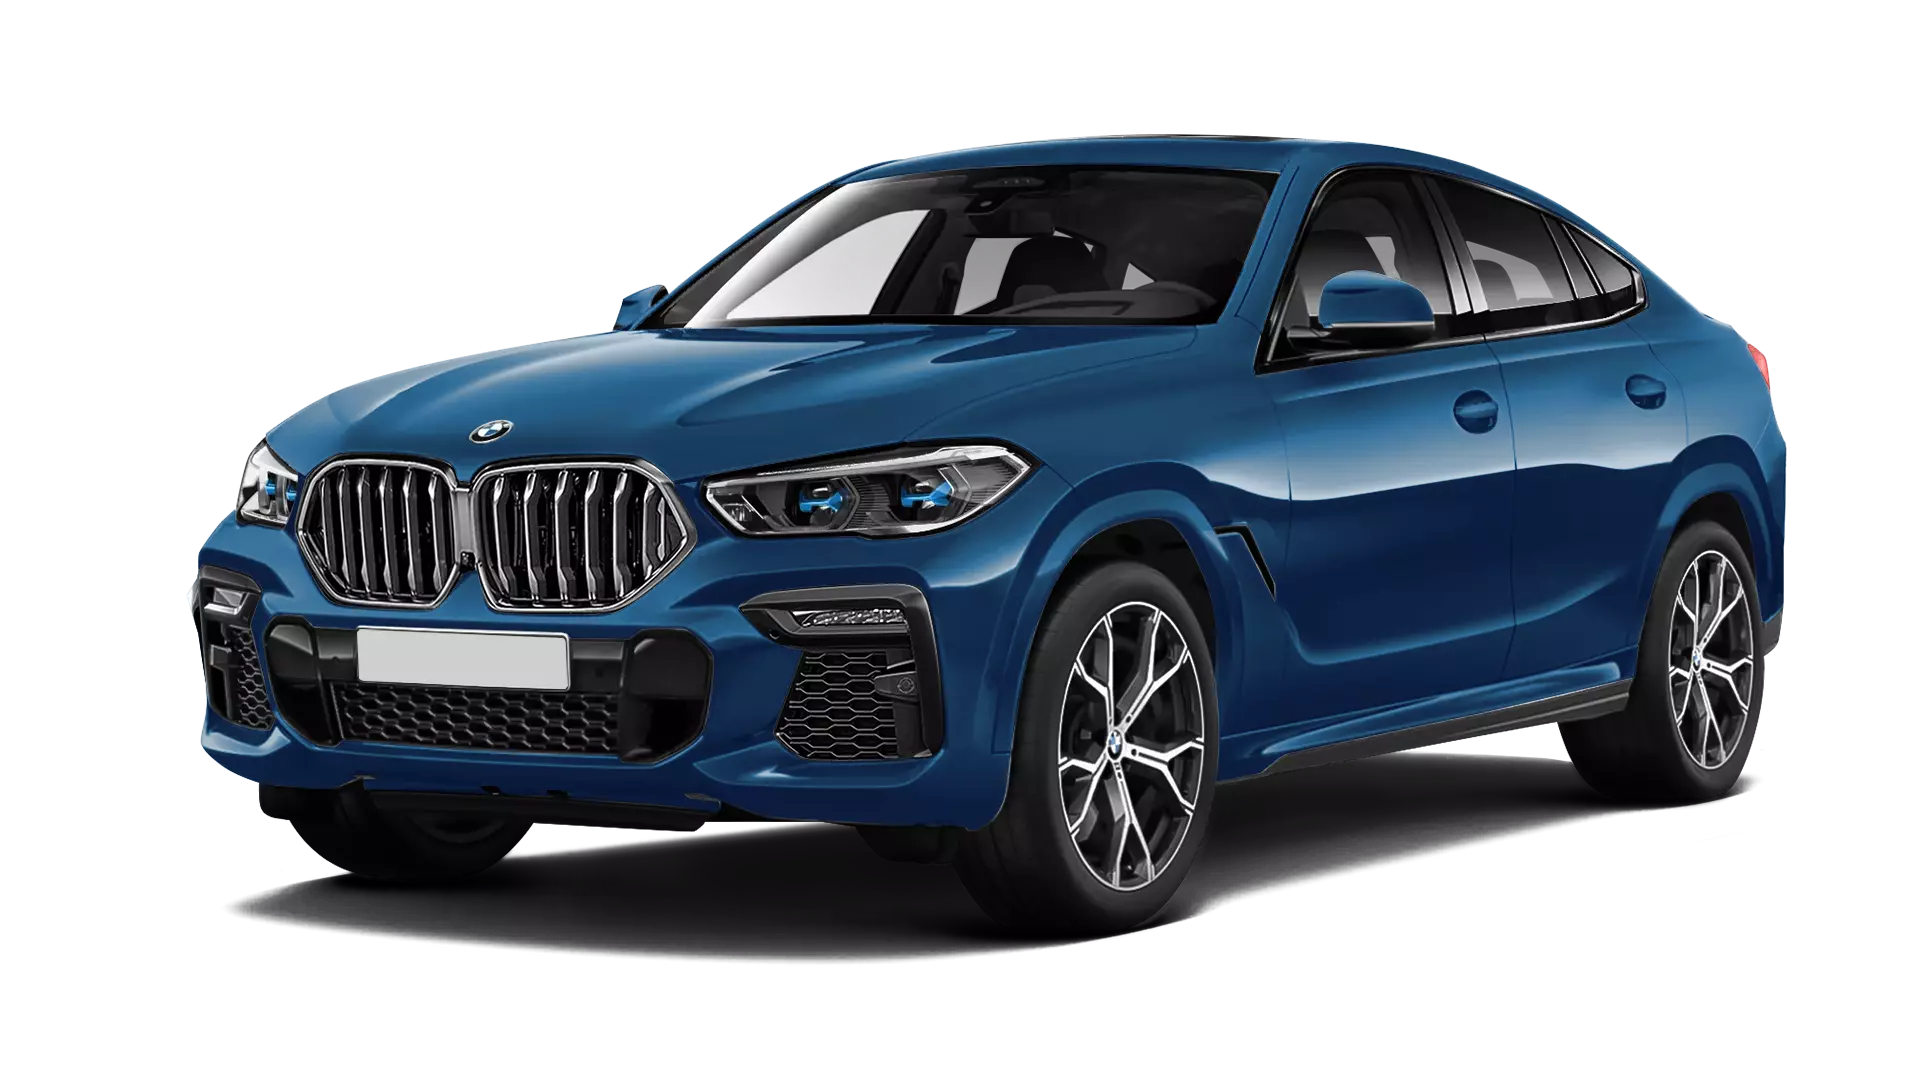 BMW X6 stock front view in phytonic blue